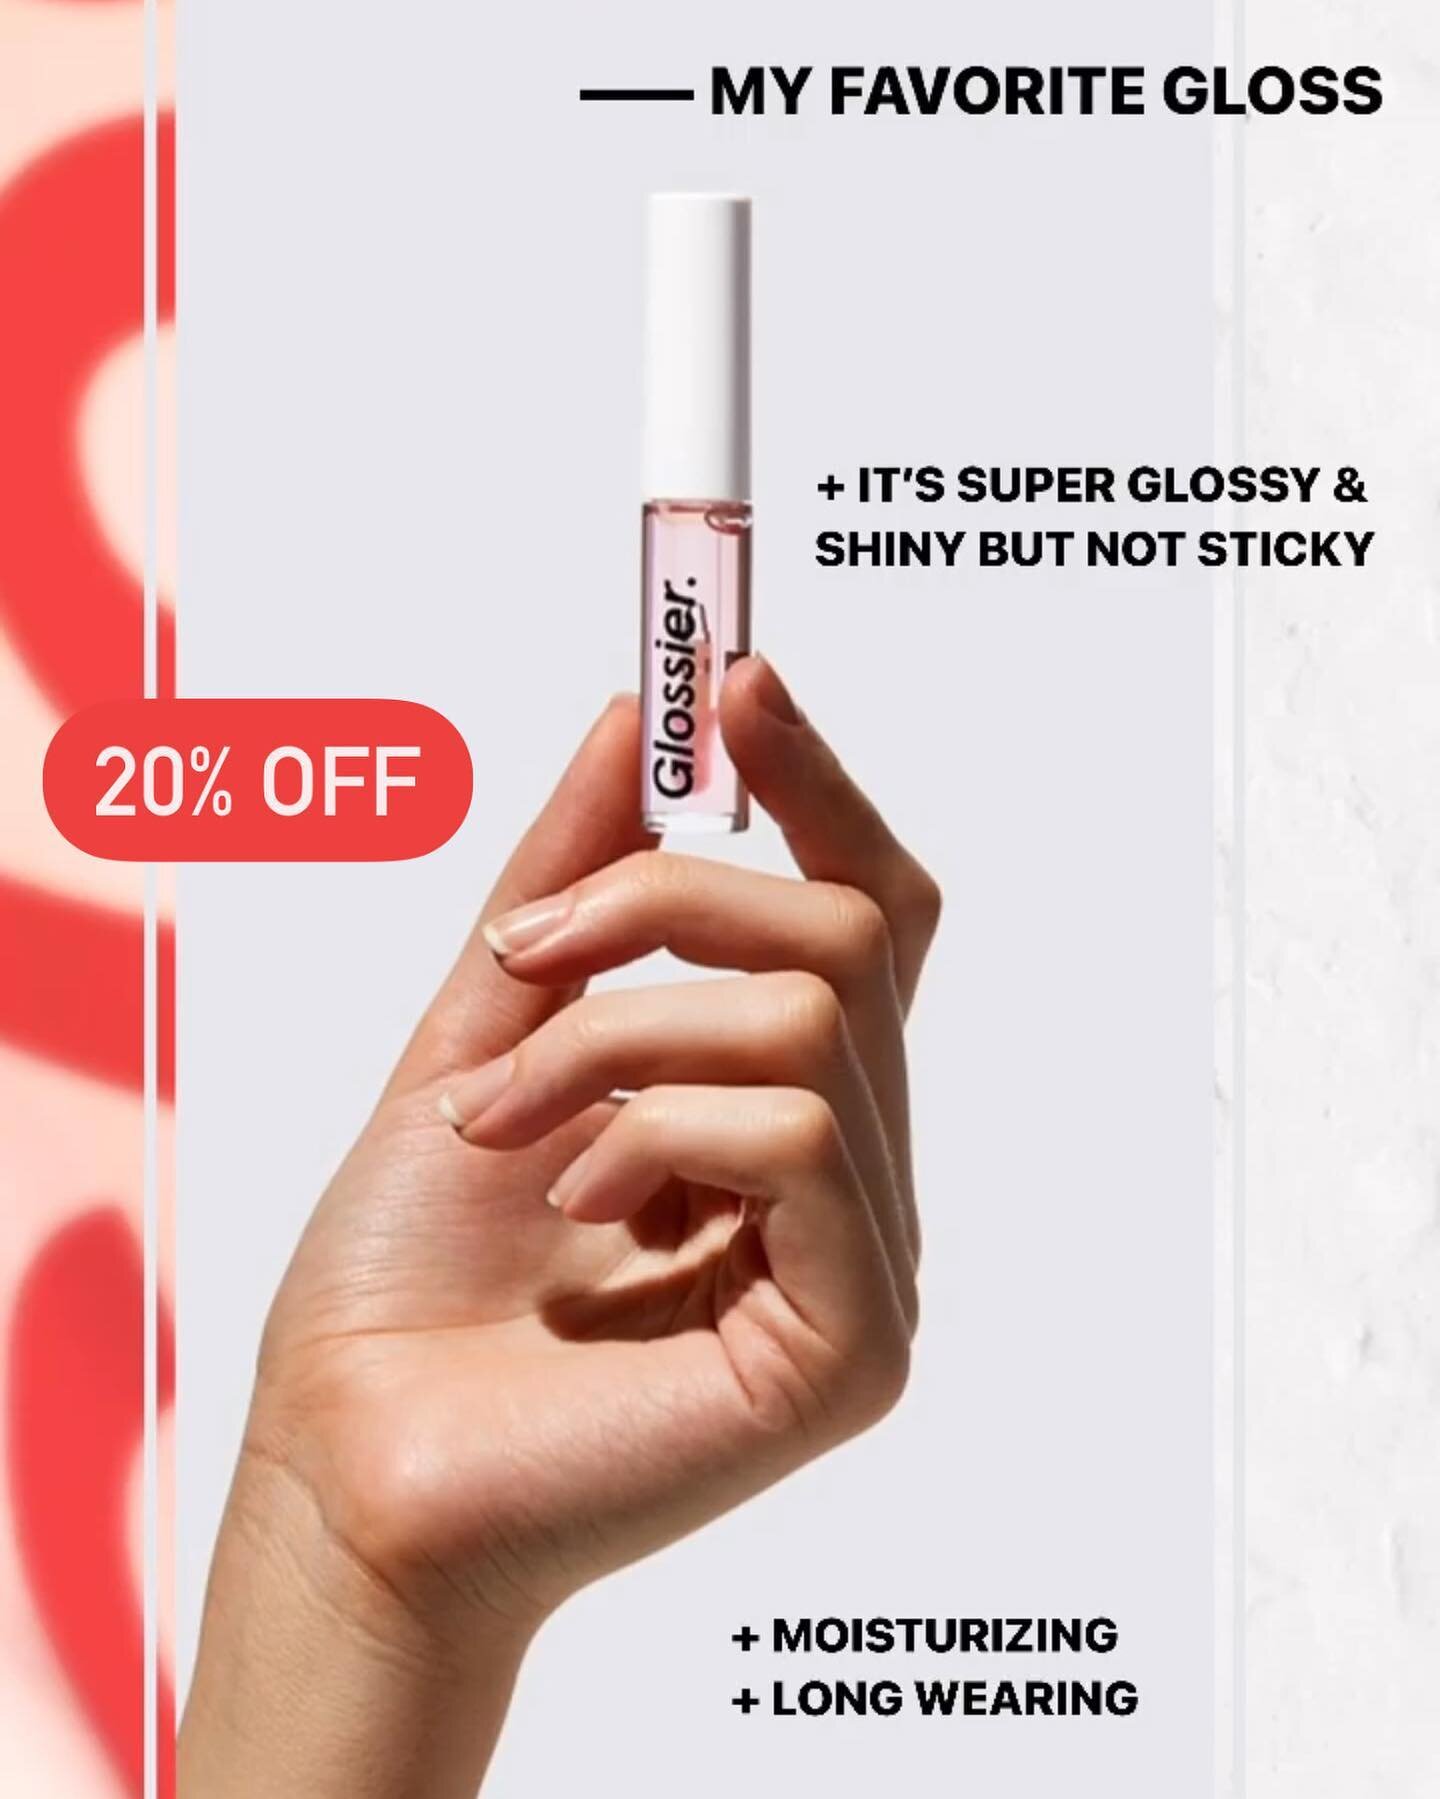 It&rsquo;s sale time at @glossier and EVERYTHING is 20%+ off! They&rsquo;re one of my favorite brands for quick, natural, everyday makeup so there is a lot I recommend. Here&rsquo;s the first few!
Click the link in my bio to shop the sale + for a lis